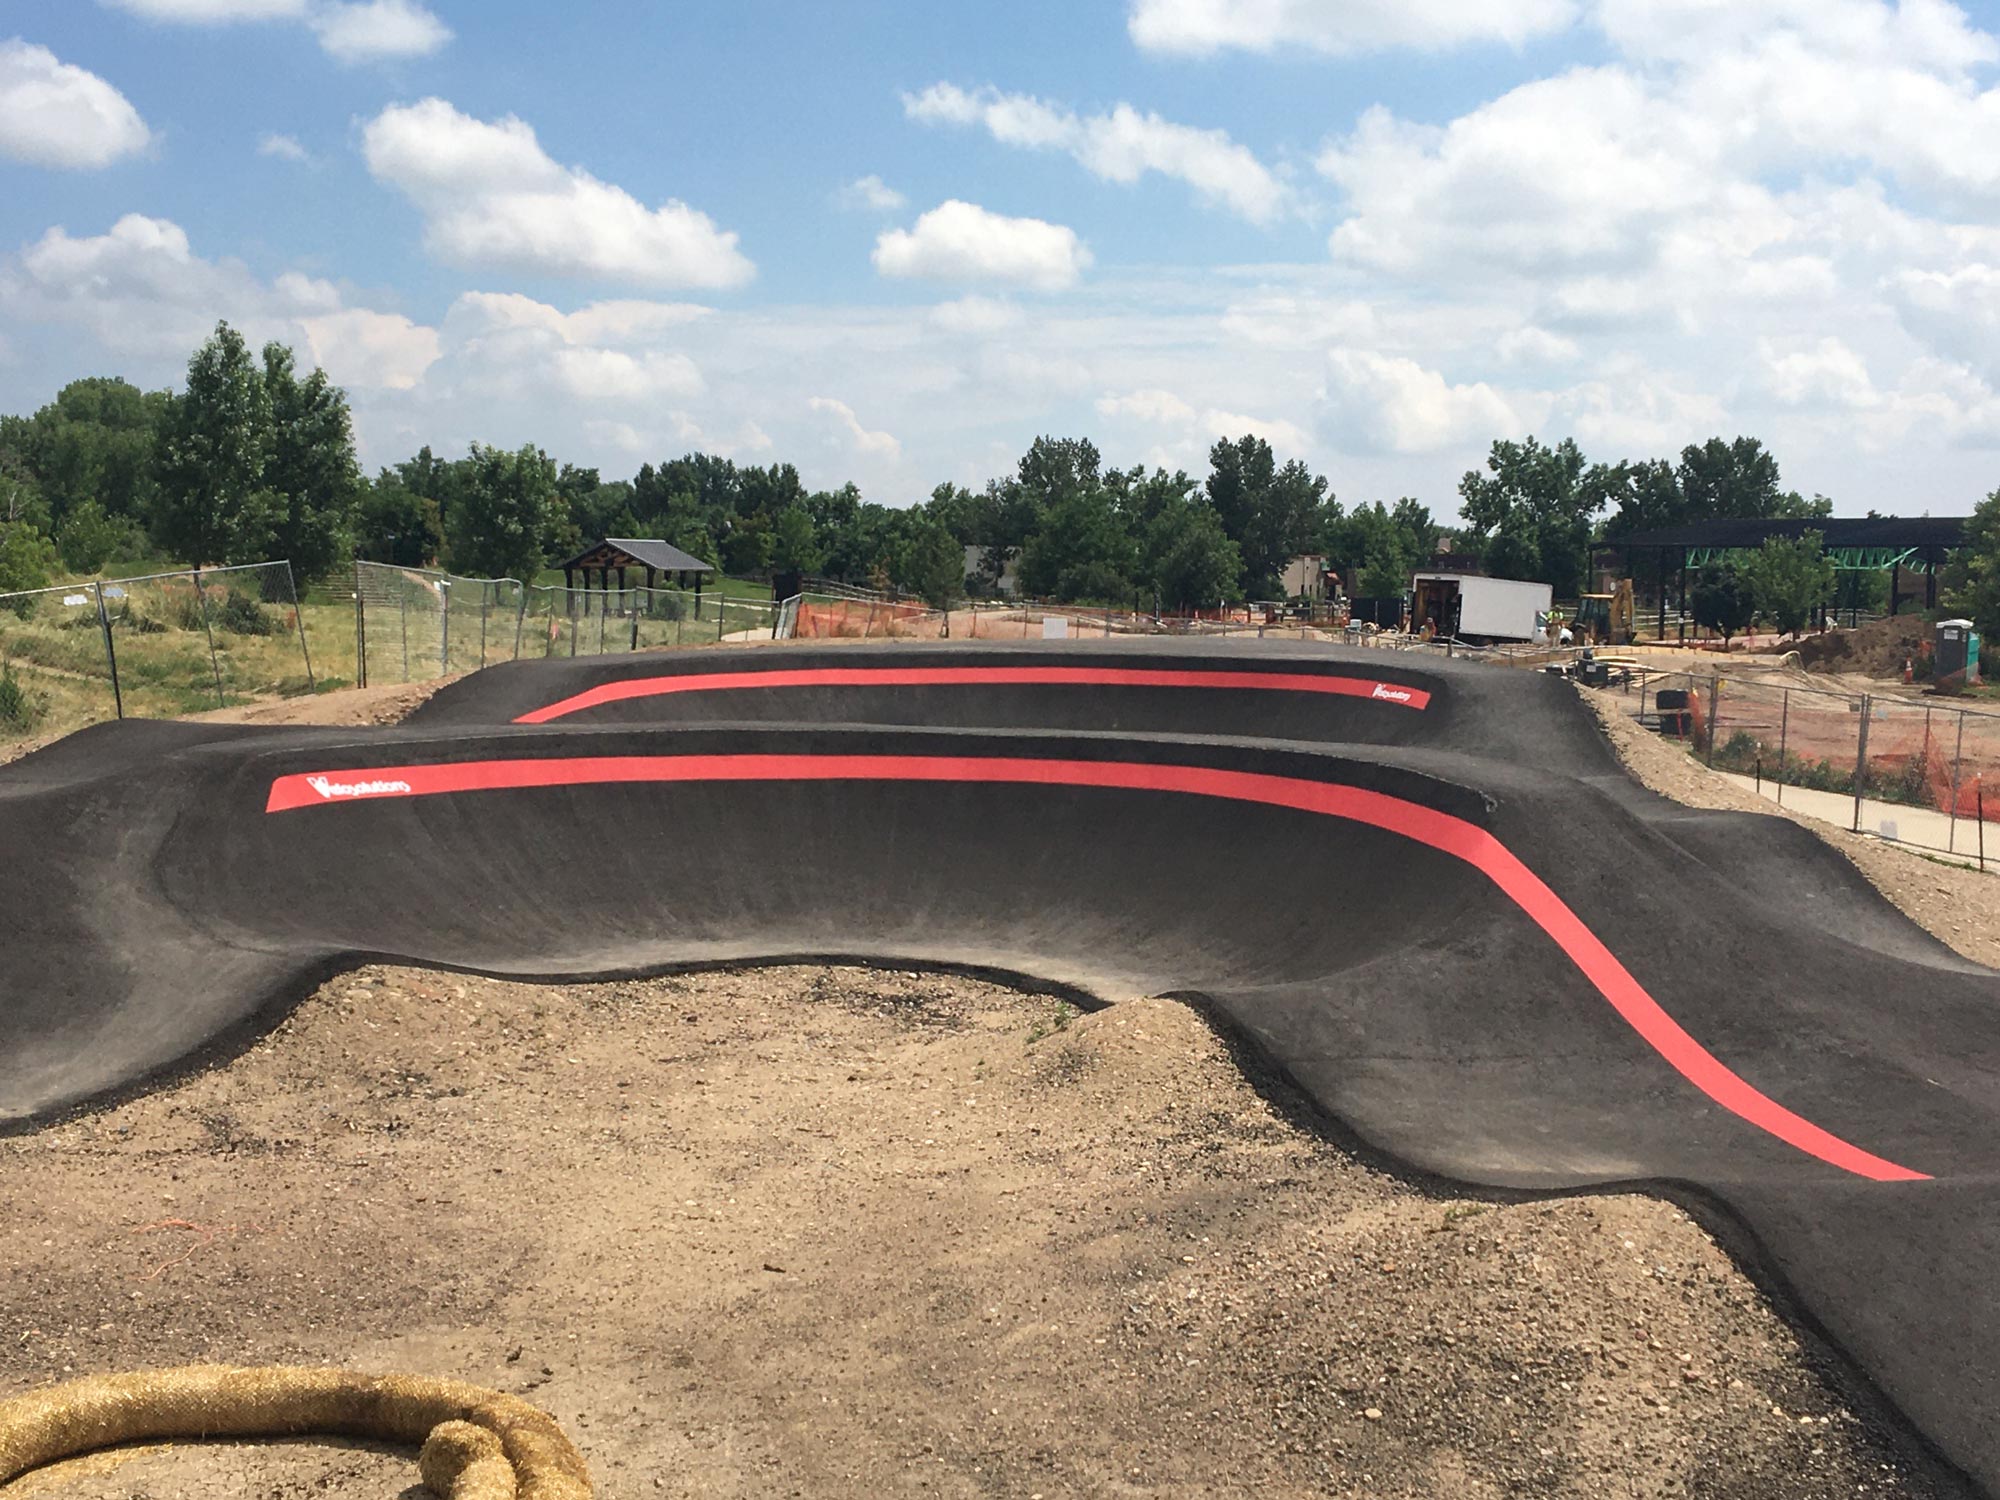 Twists and turns of black asphalt on the Valmont Pump Track, surrounded by dirt awaiting grass to seed.